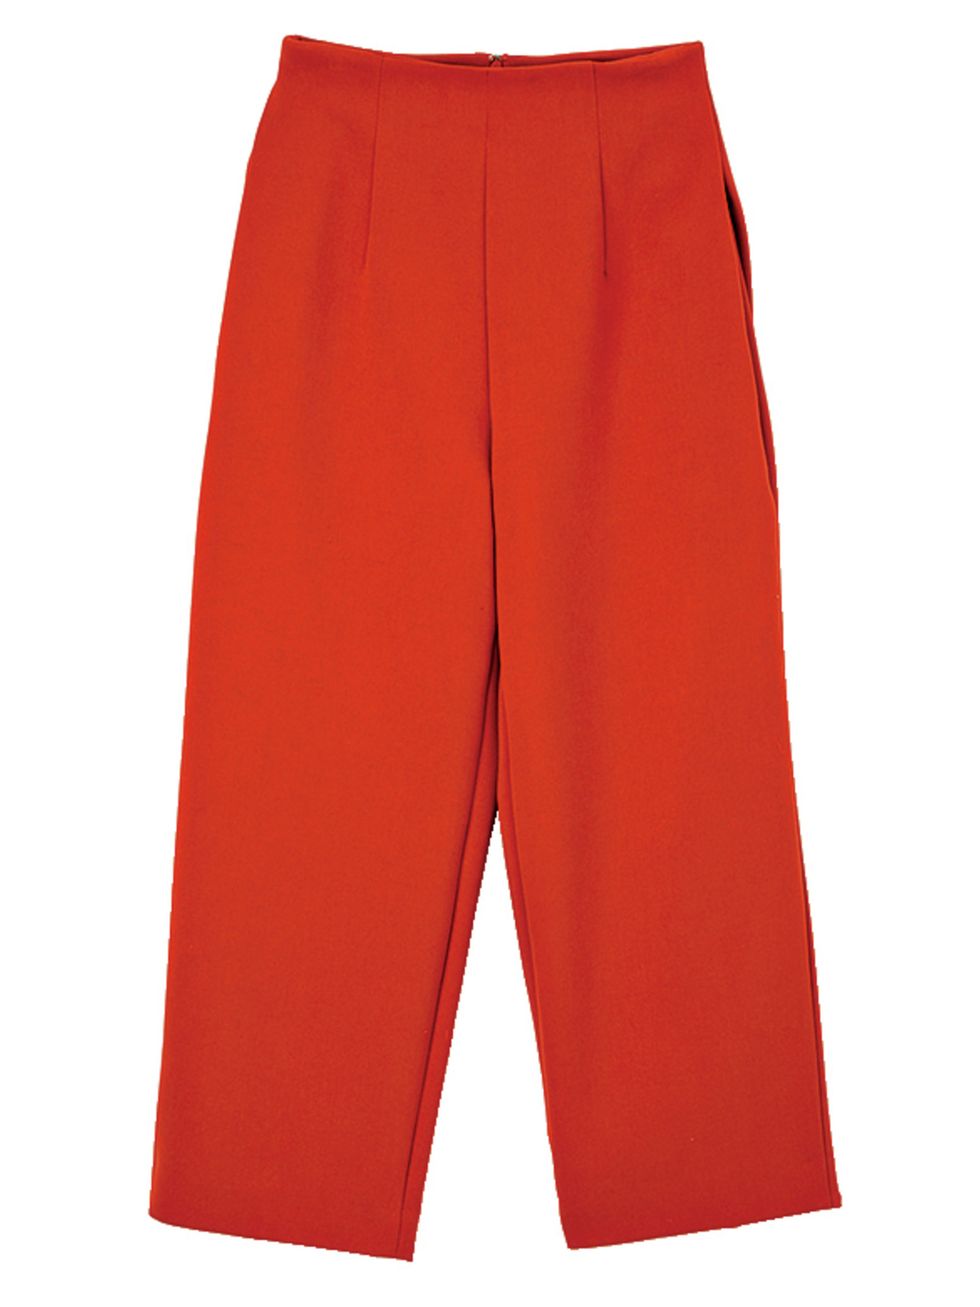 Clothing, Brown, Trousers, Textile, Red, Standing, Sportswear, Orange, Active pants, Waist, 